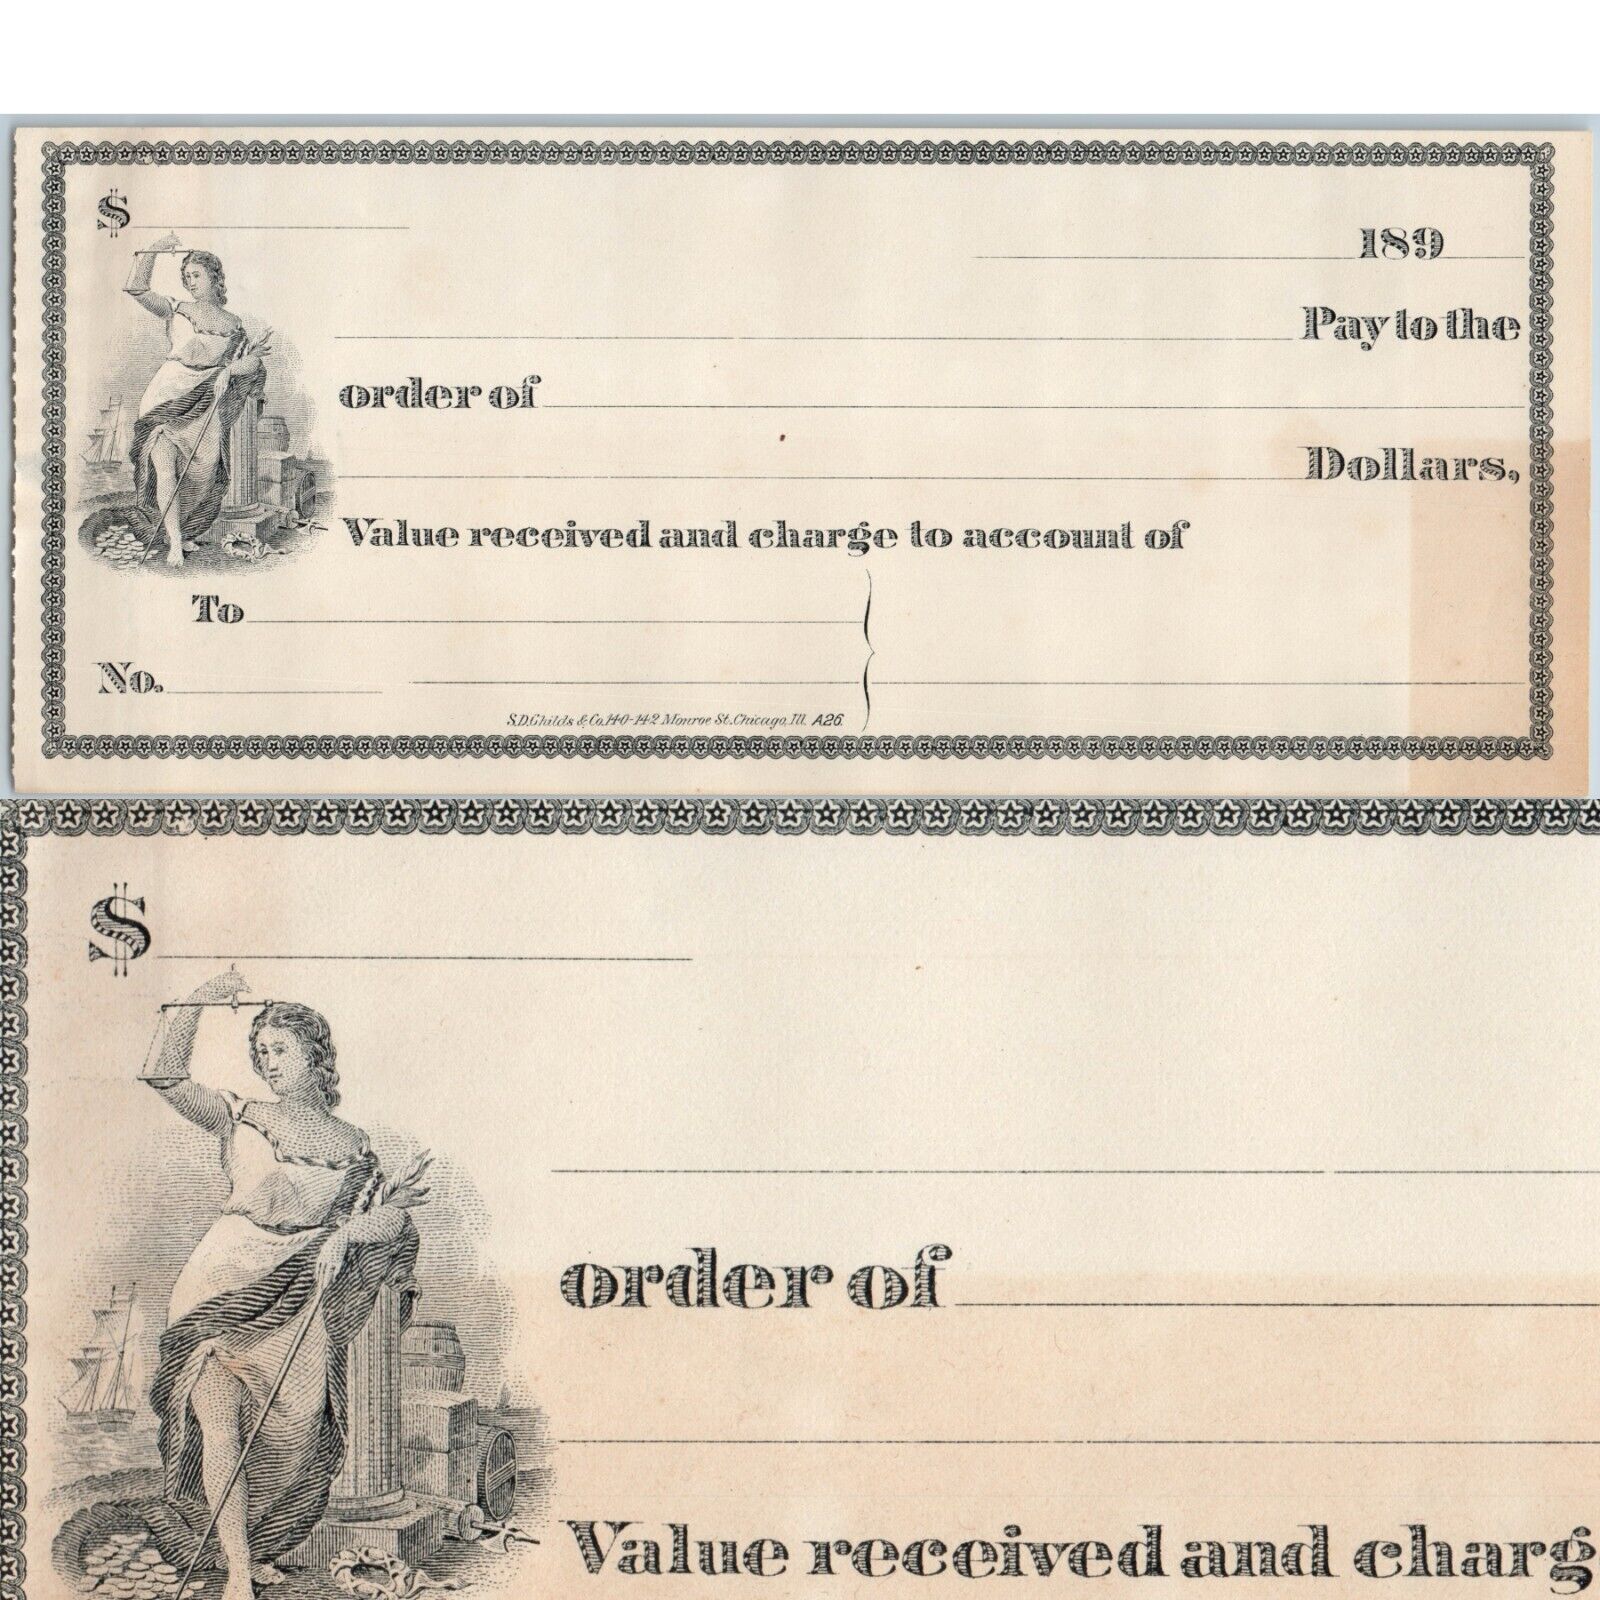 x2 LOT c1890s Blank Paper Check Engraved Woman Letterhead SD Childs Bank Bill 1E